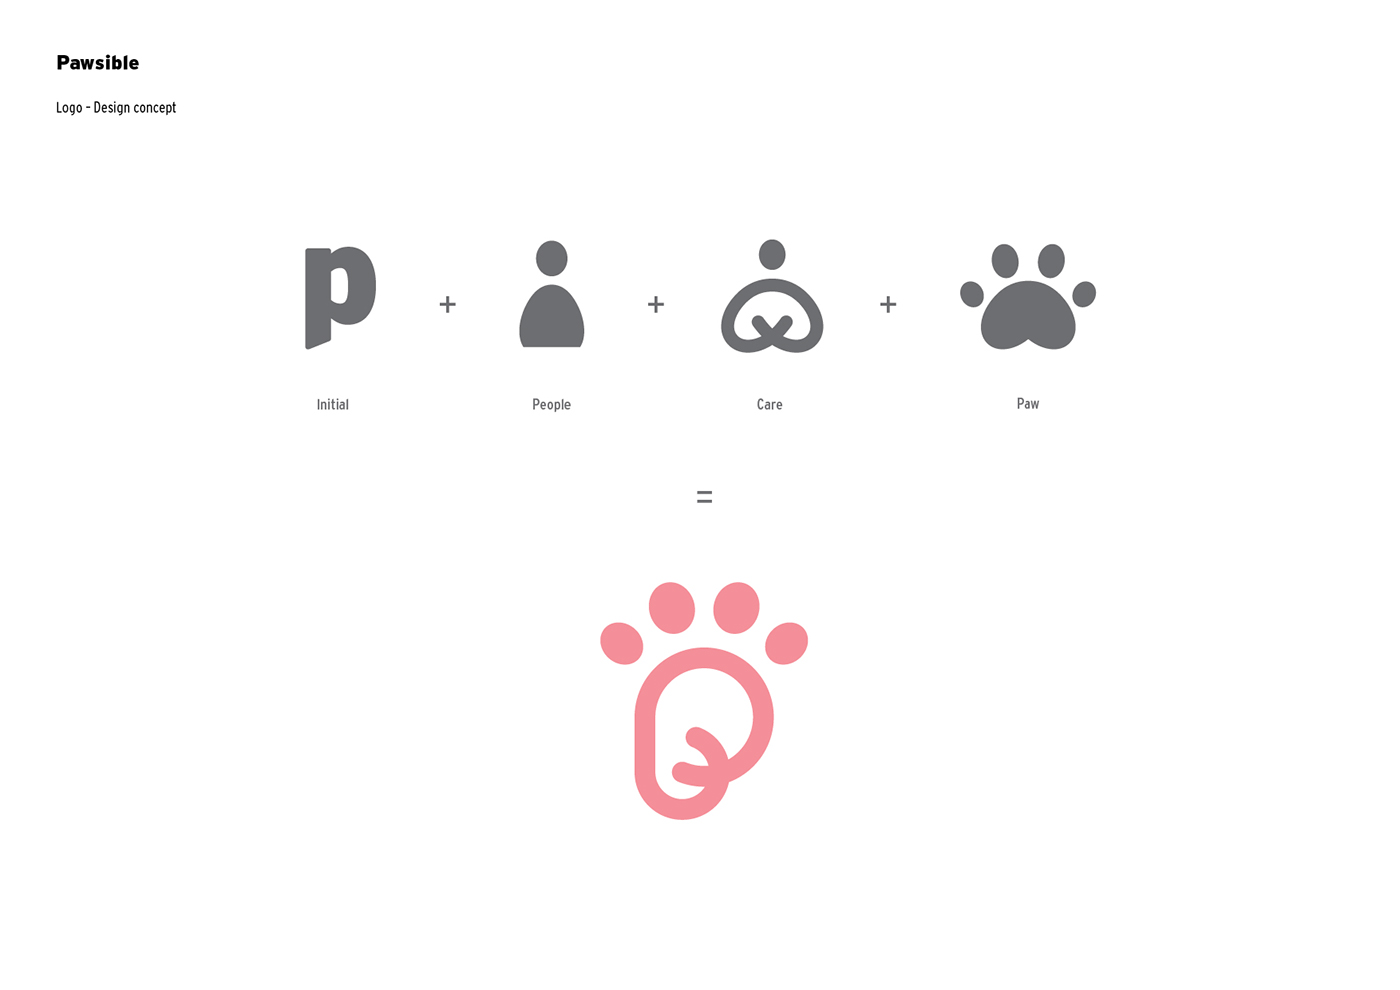 Pawsible is a social startup/enterprise uniting responsible pet-lovers to support each other through a sharing economy platform and build a pet friendly city through responsible